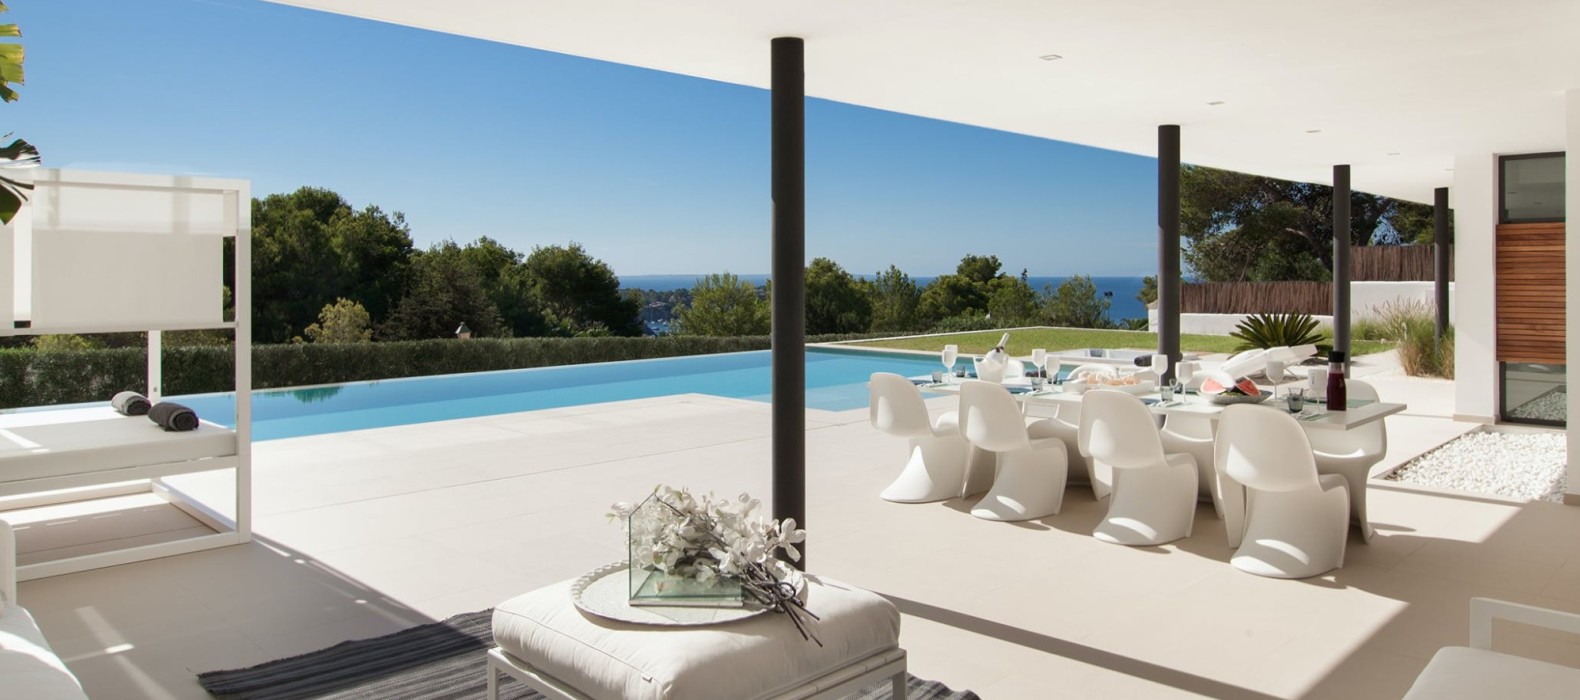 Exterior dining and chill area of Villa Kahil in Ibiza